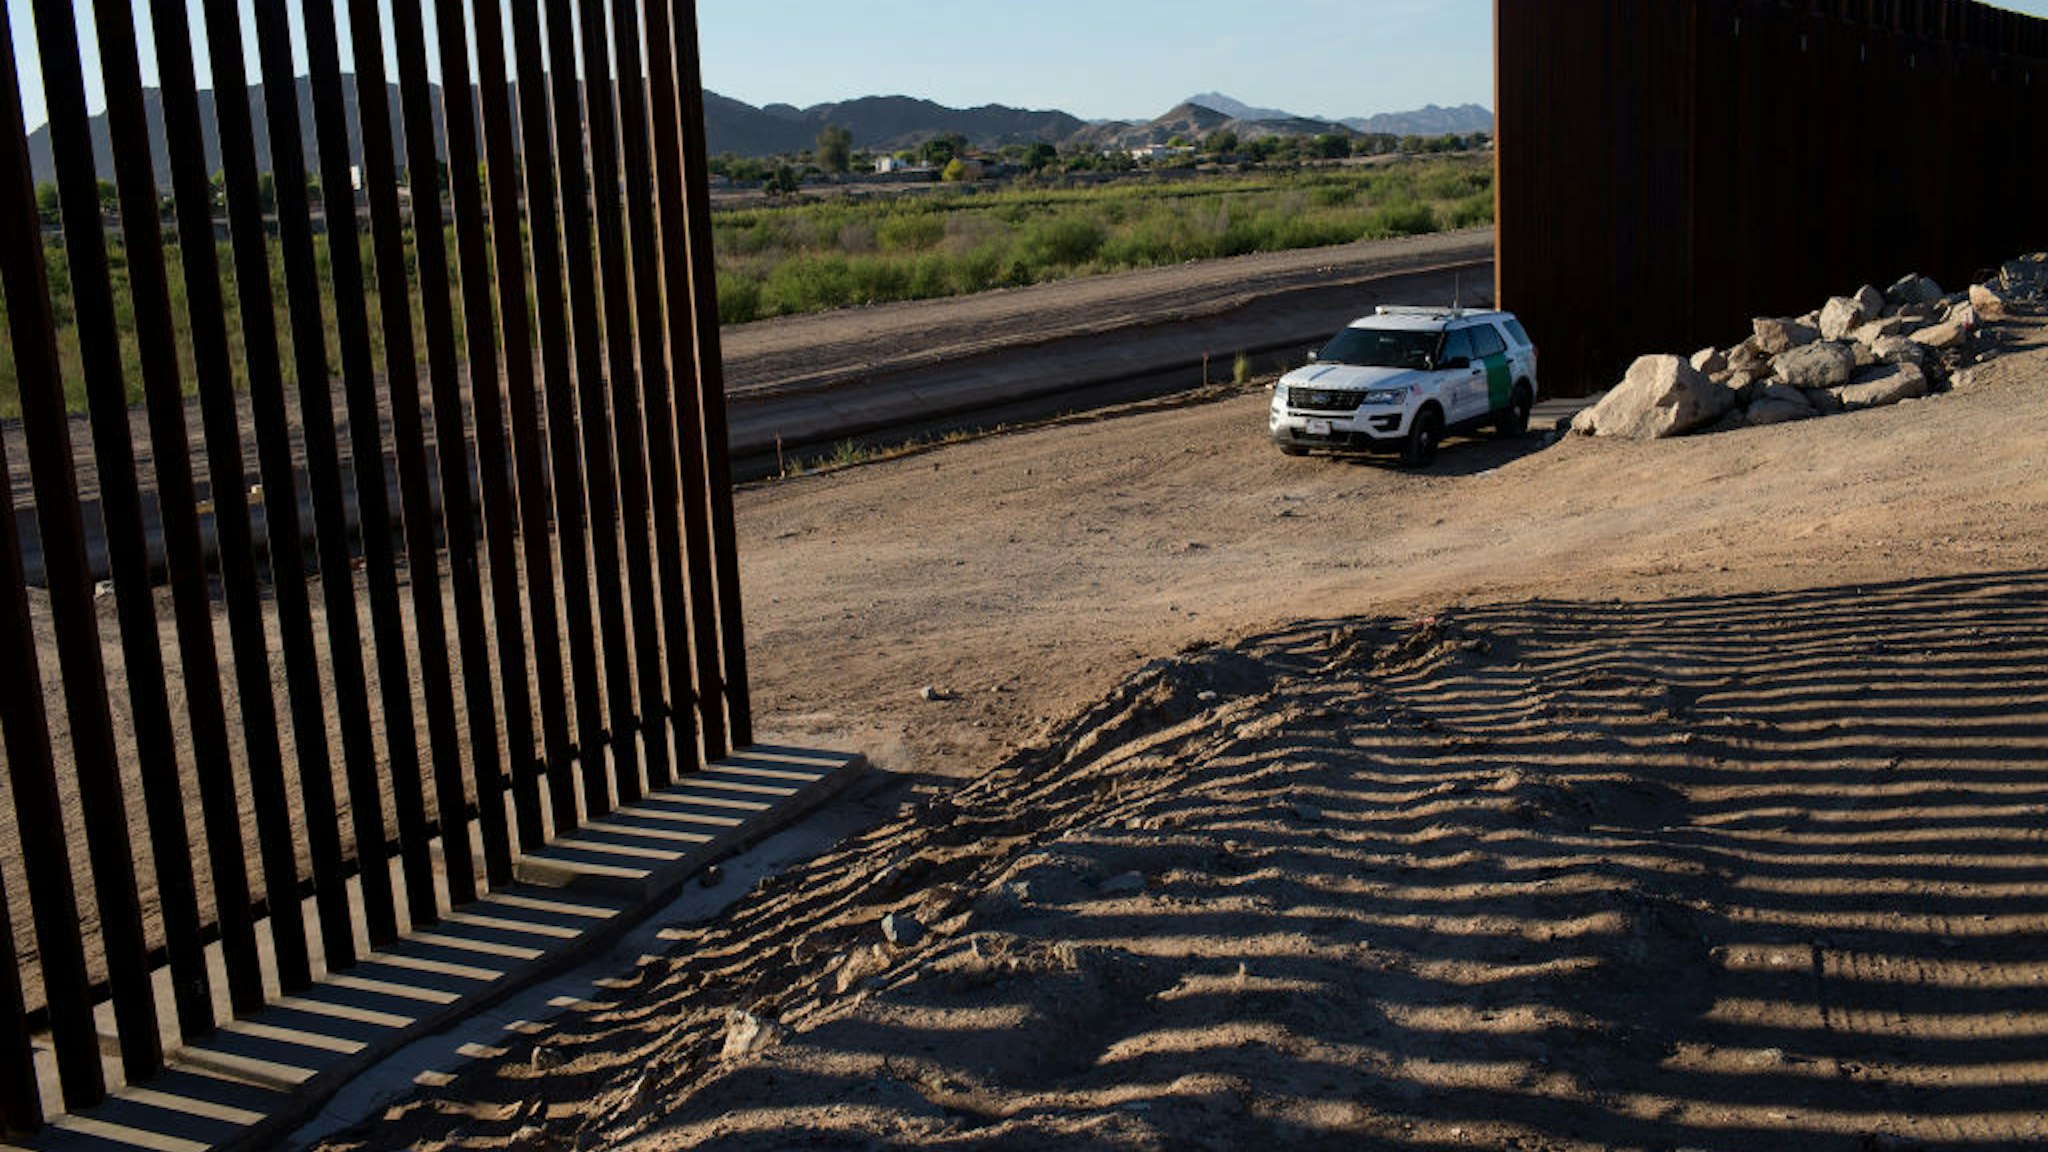 YUMA, ARIZONA - APRIL 30: United States Border Patrol agents guard a gap in the new border wall along the Colorado River where families from Central and South America have been crossing into the United States from Mexico to ask for asylum, April 30, 2021 outside of Yuma, Arizona. (Photo by Andrew Lichtenstein/Corbis via Getty Images)